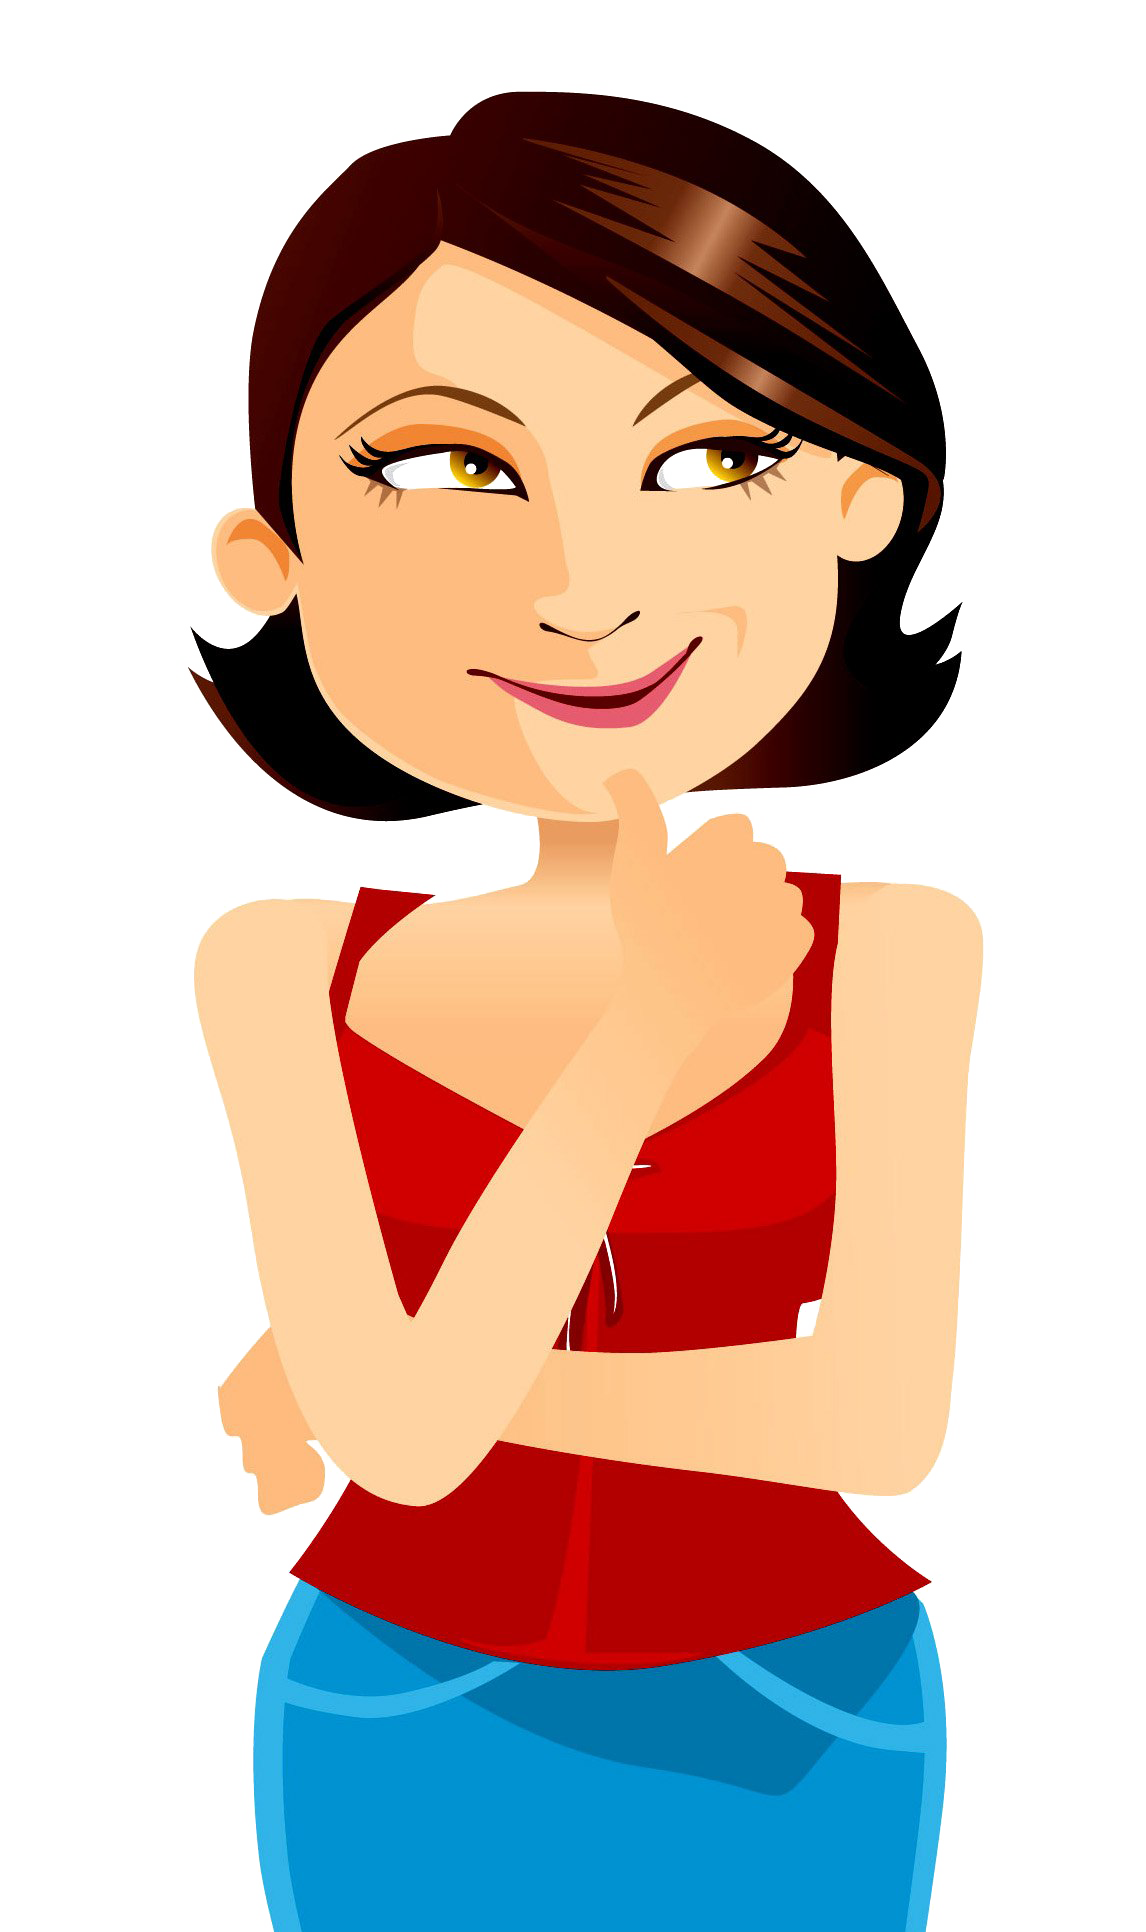 Thinking Woman PNG Image Free Download PNG SVG Clip art for Web Download Clip Art PNG Icon Arts